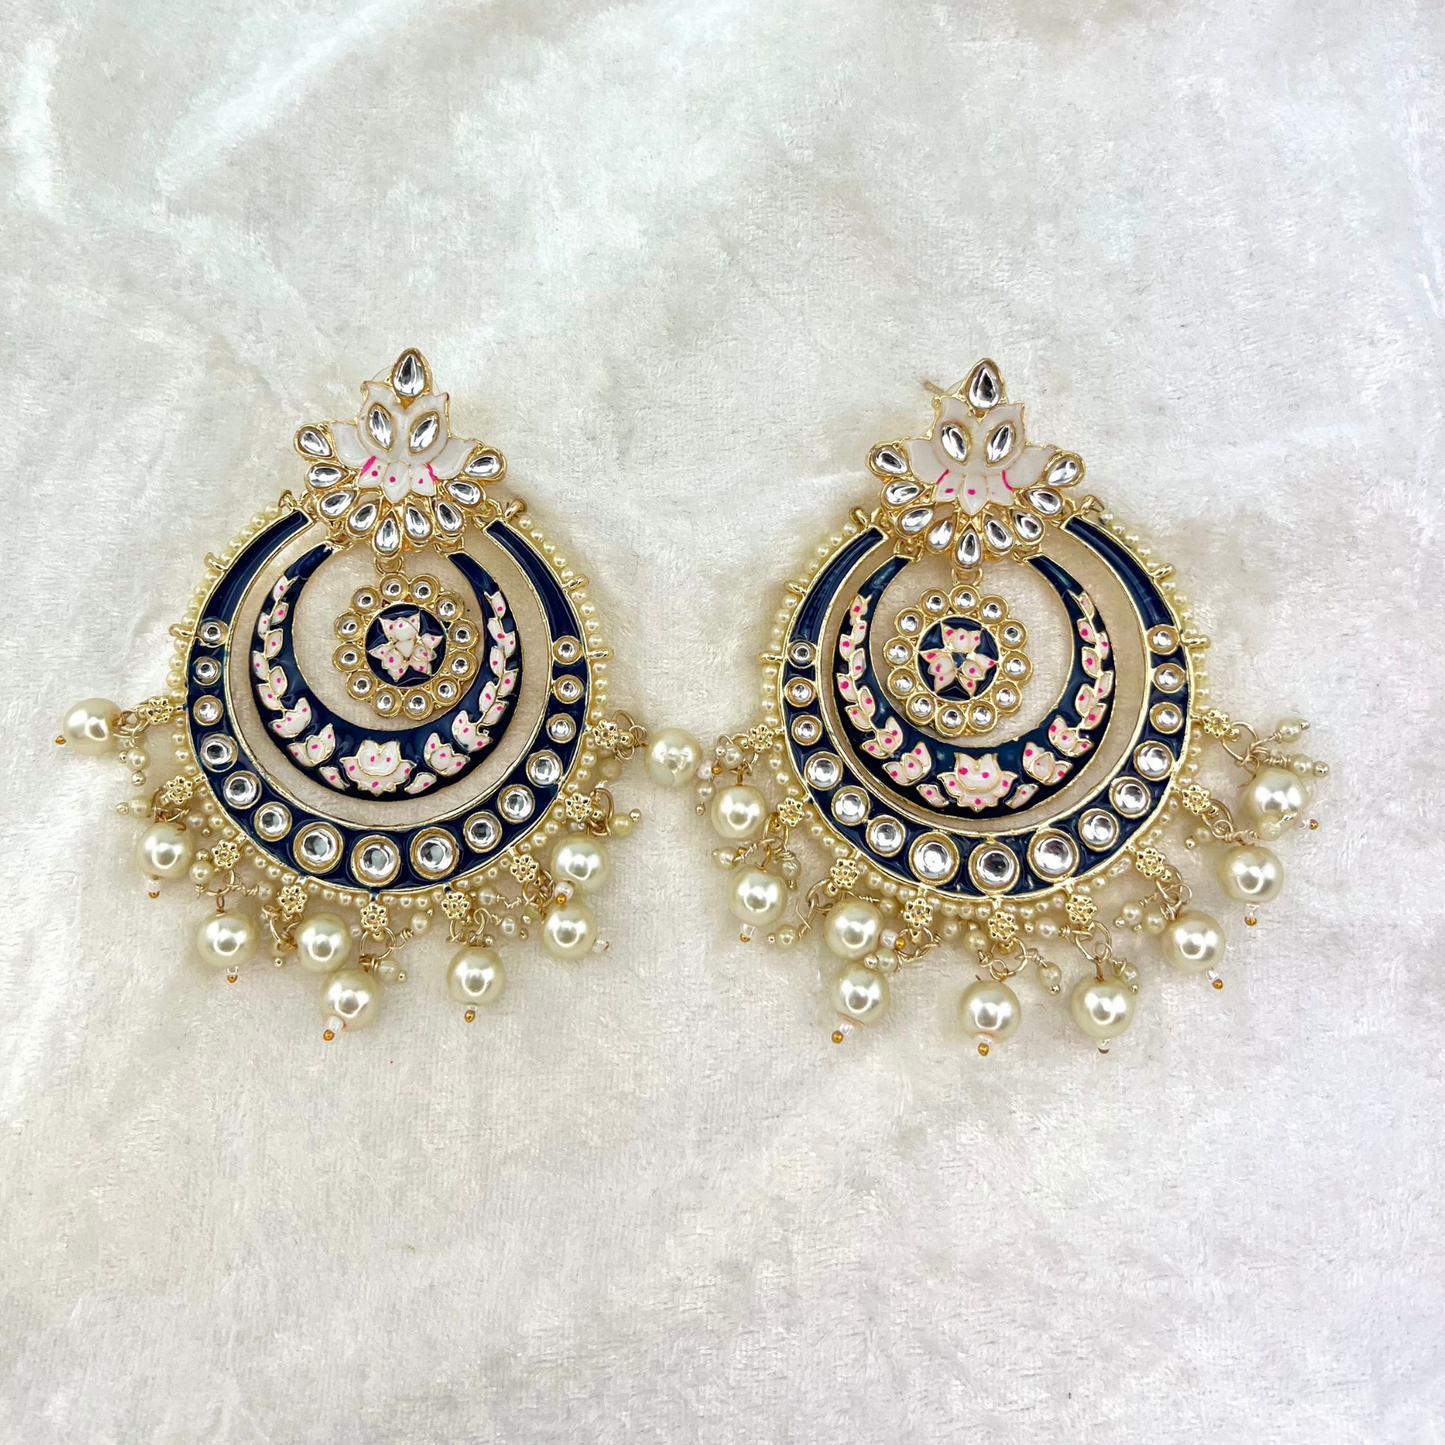 Large Indian Wedding Earrings in navy with pearls